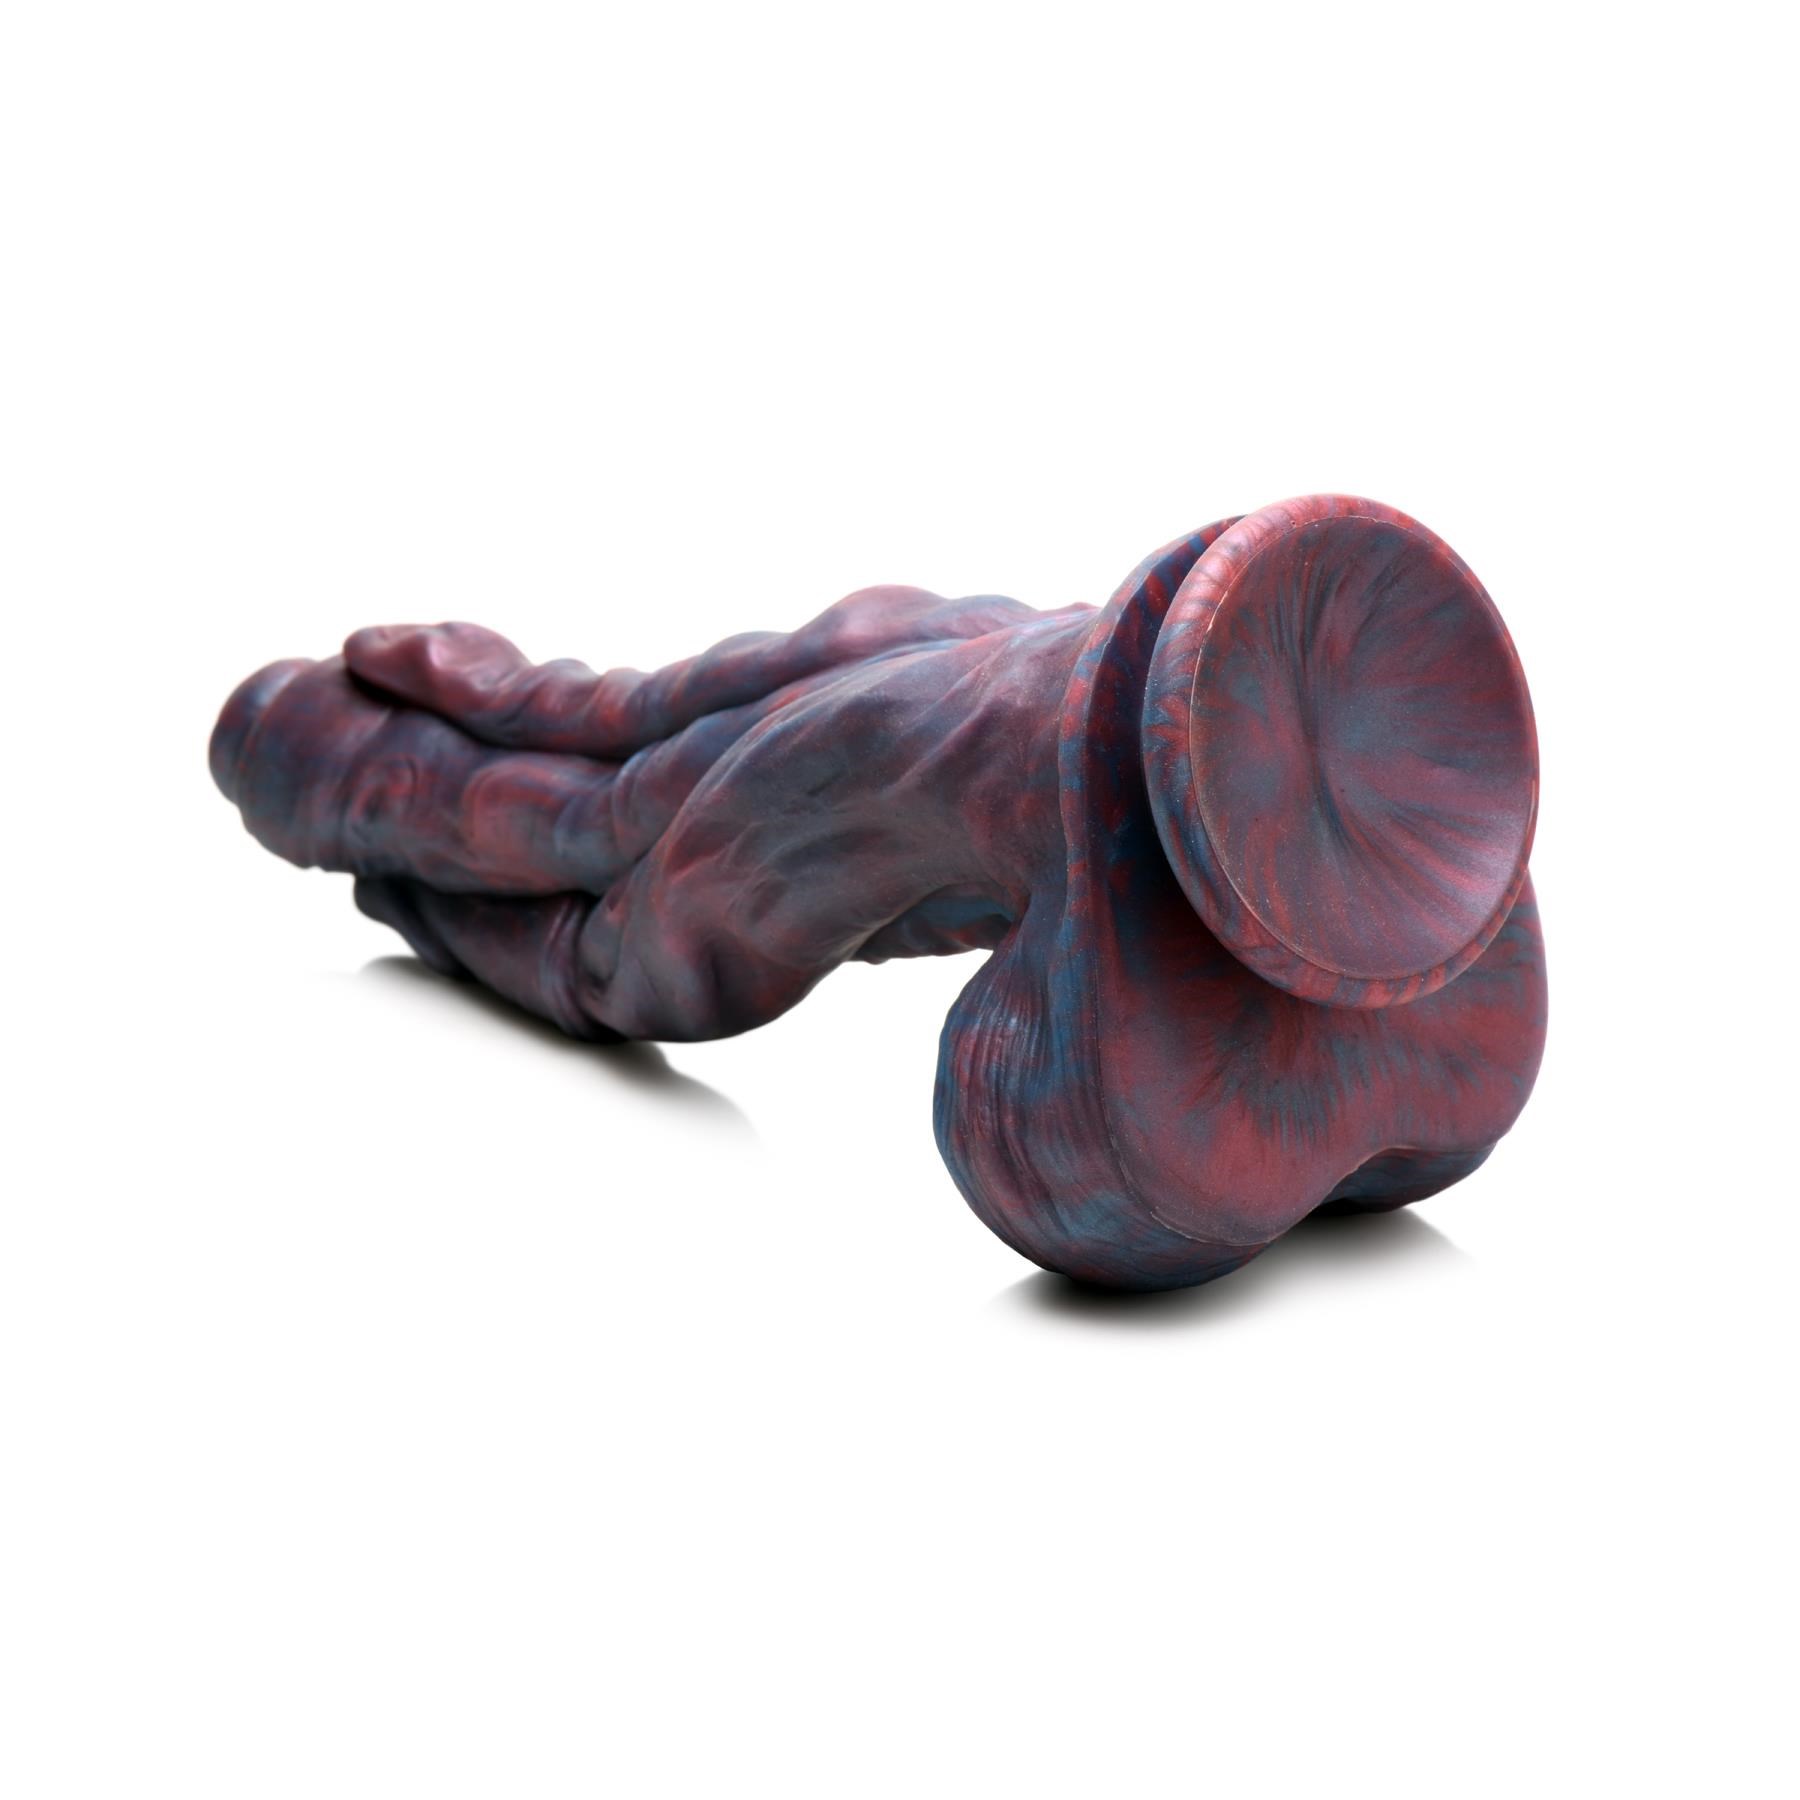 CreatureCocks Hydra Sea Monster Dildo - Product Shot Showing Suction Cup